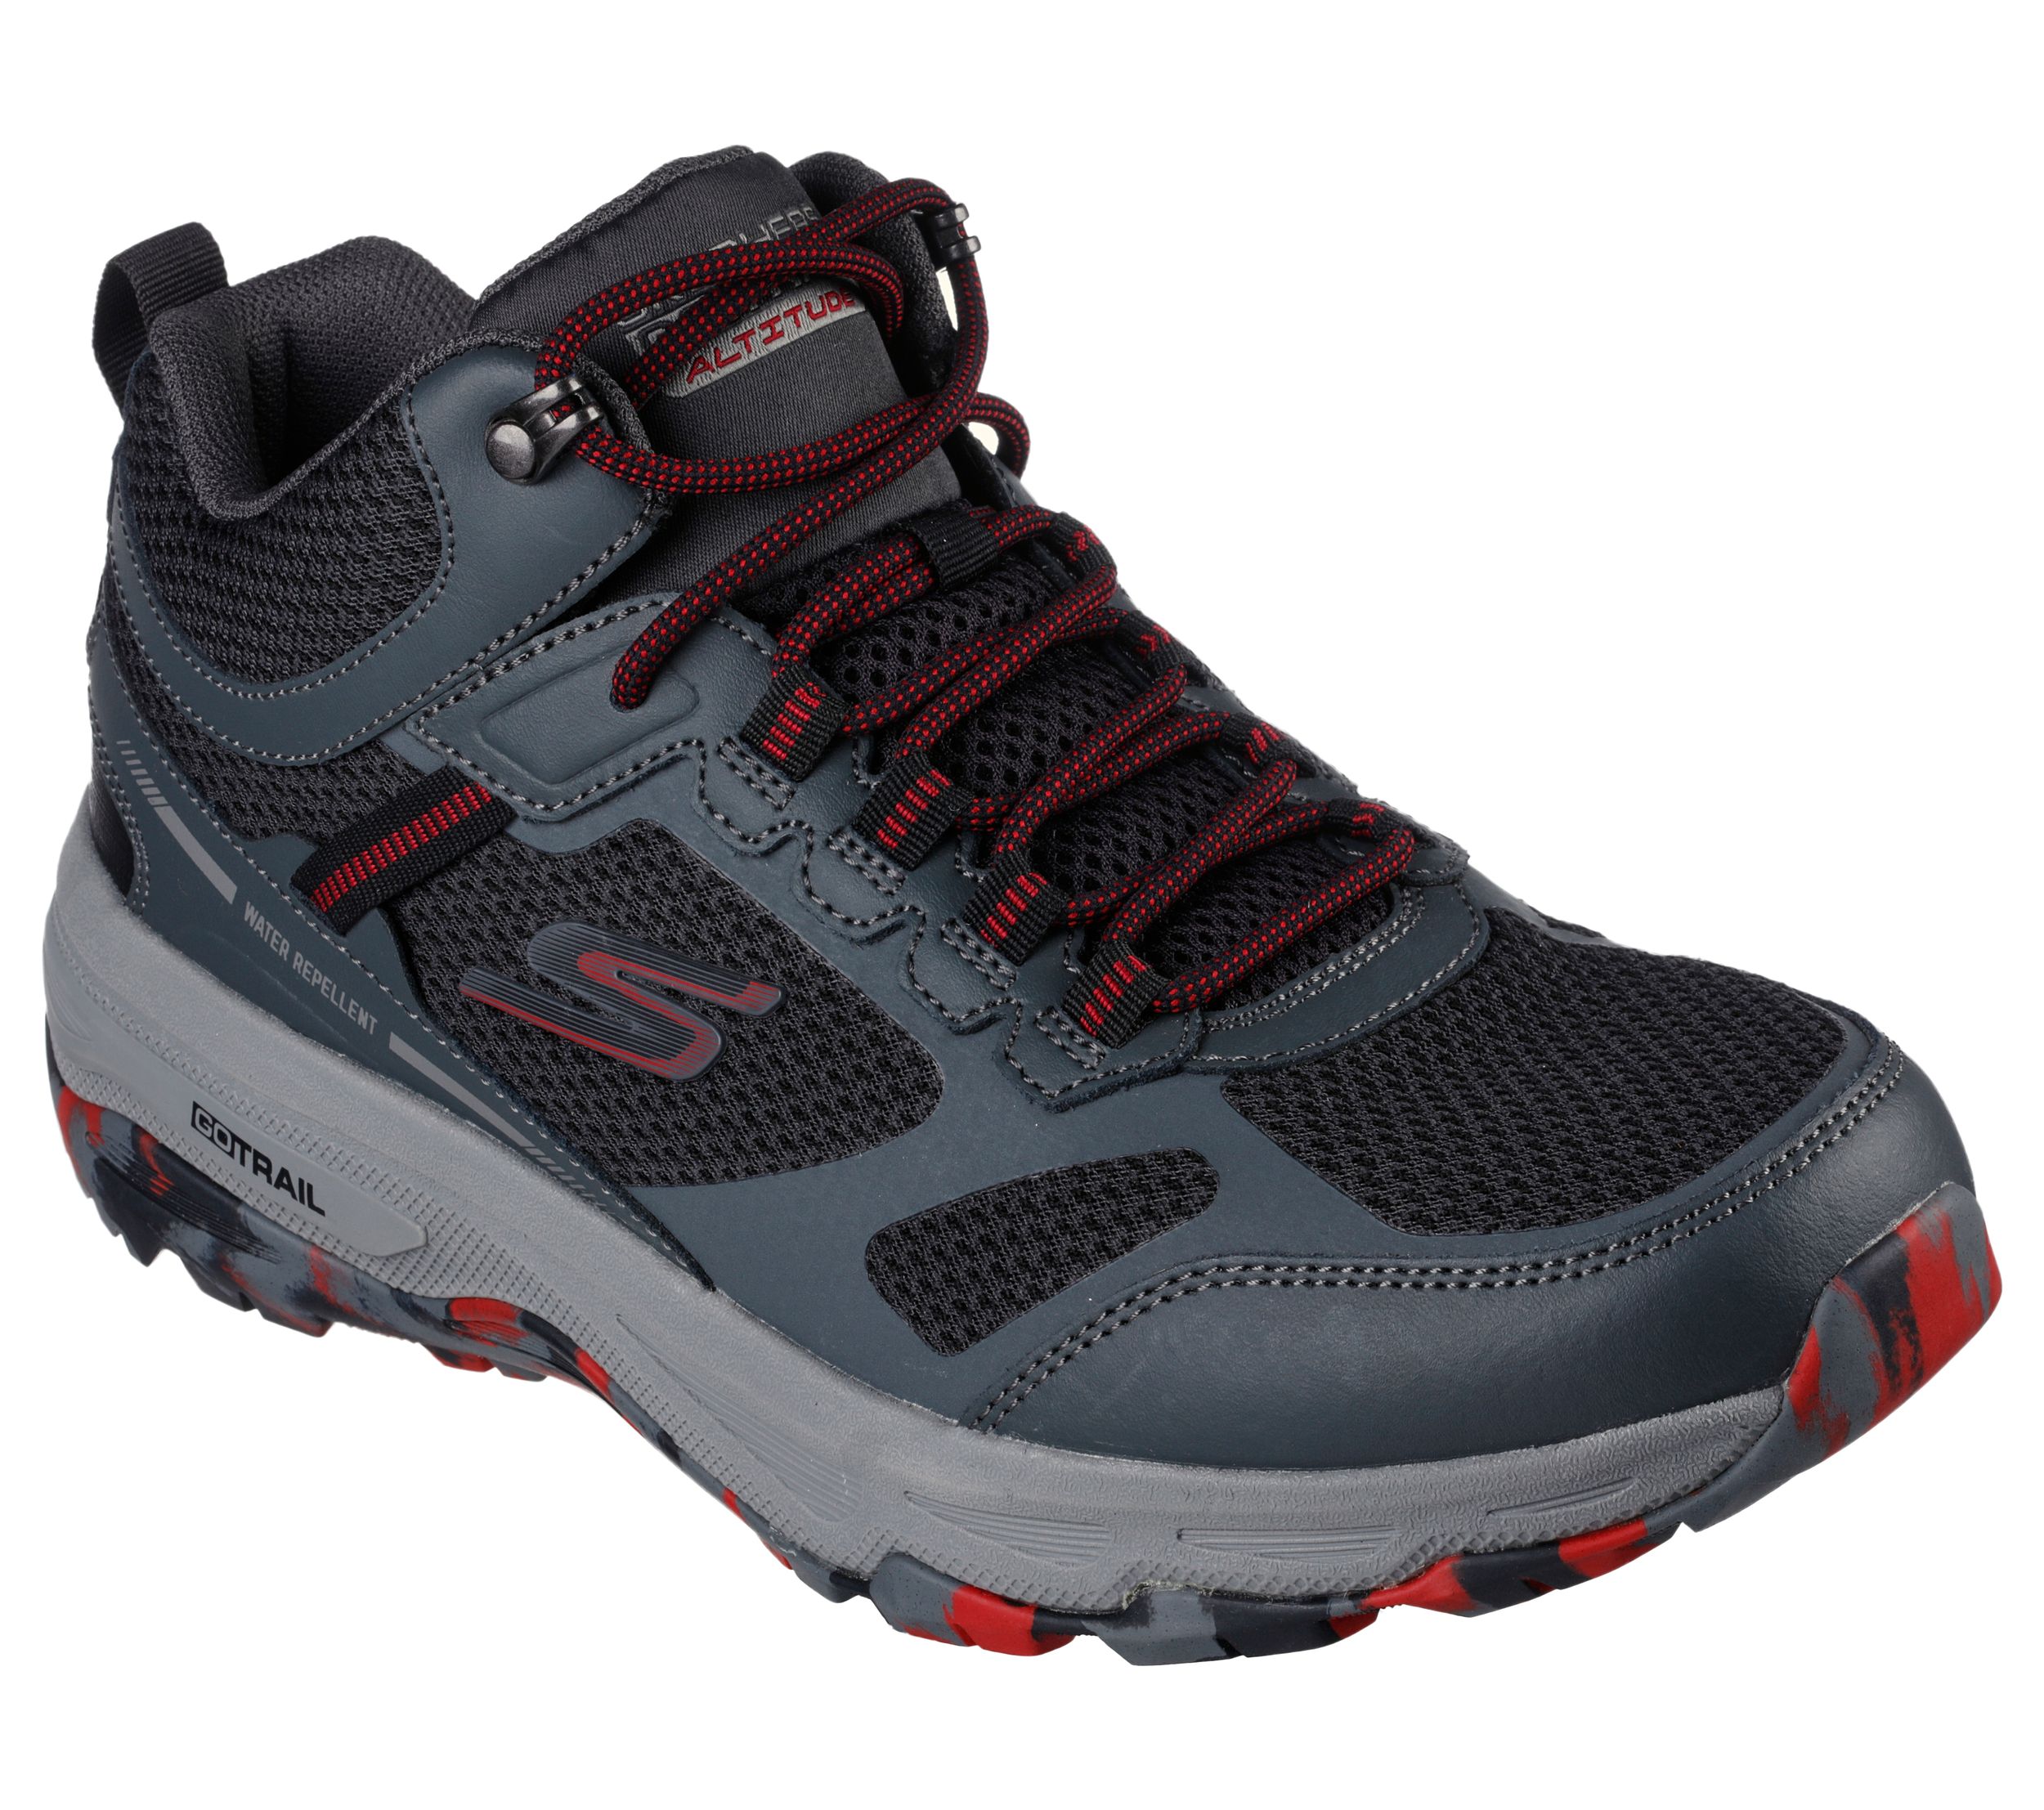 Skechers Performance GO RUN TRAIL ALTITUDE HIGHLY - Trail running